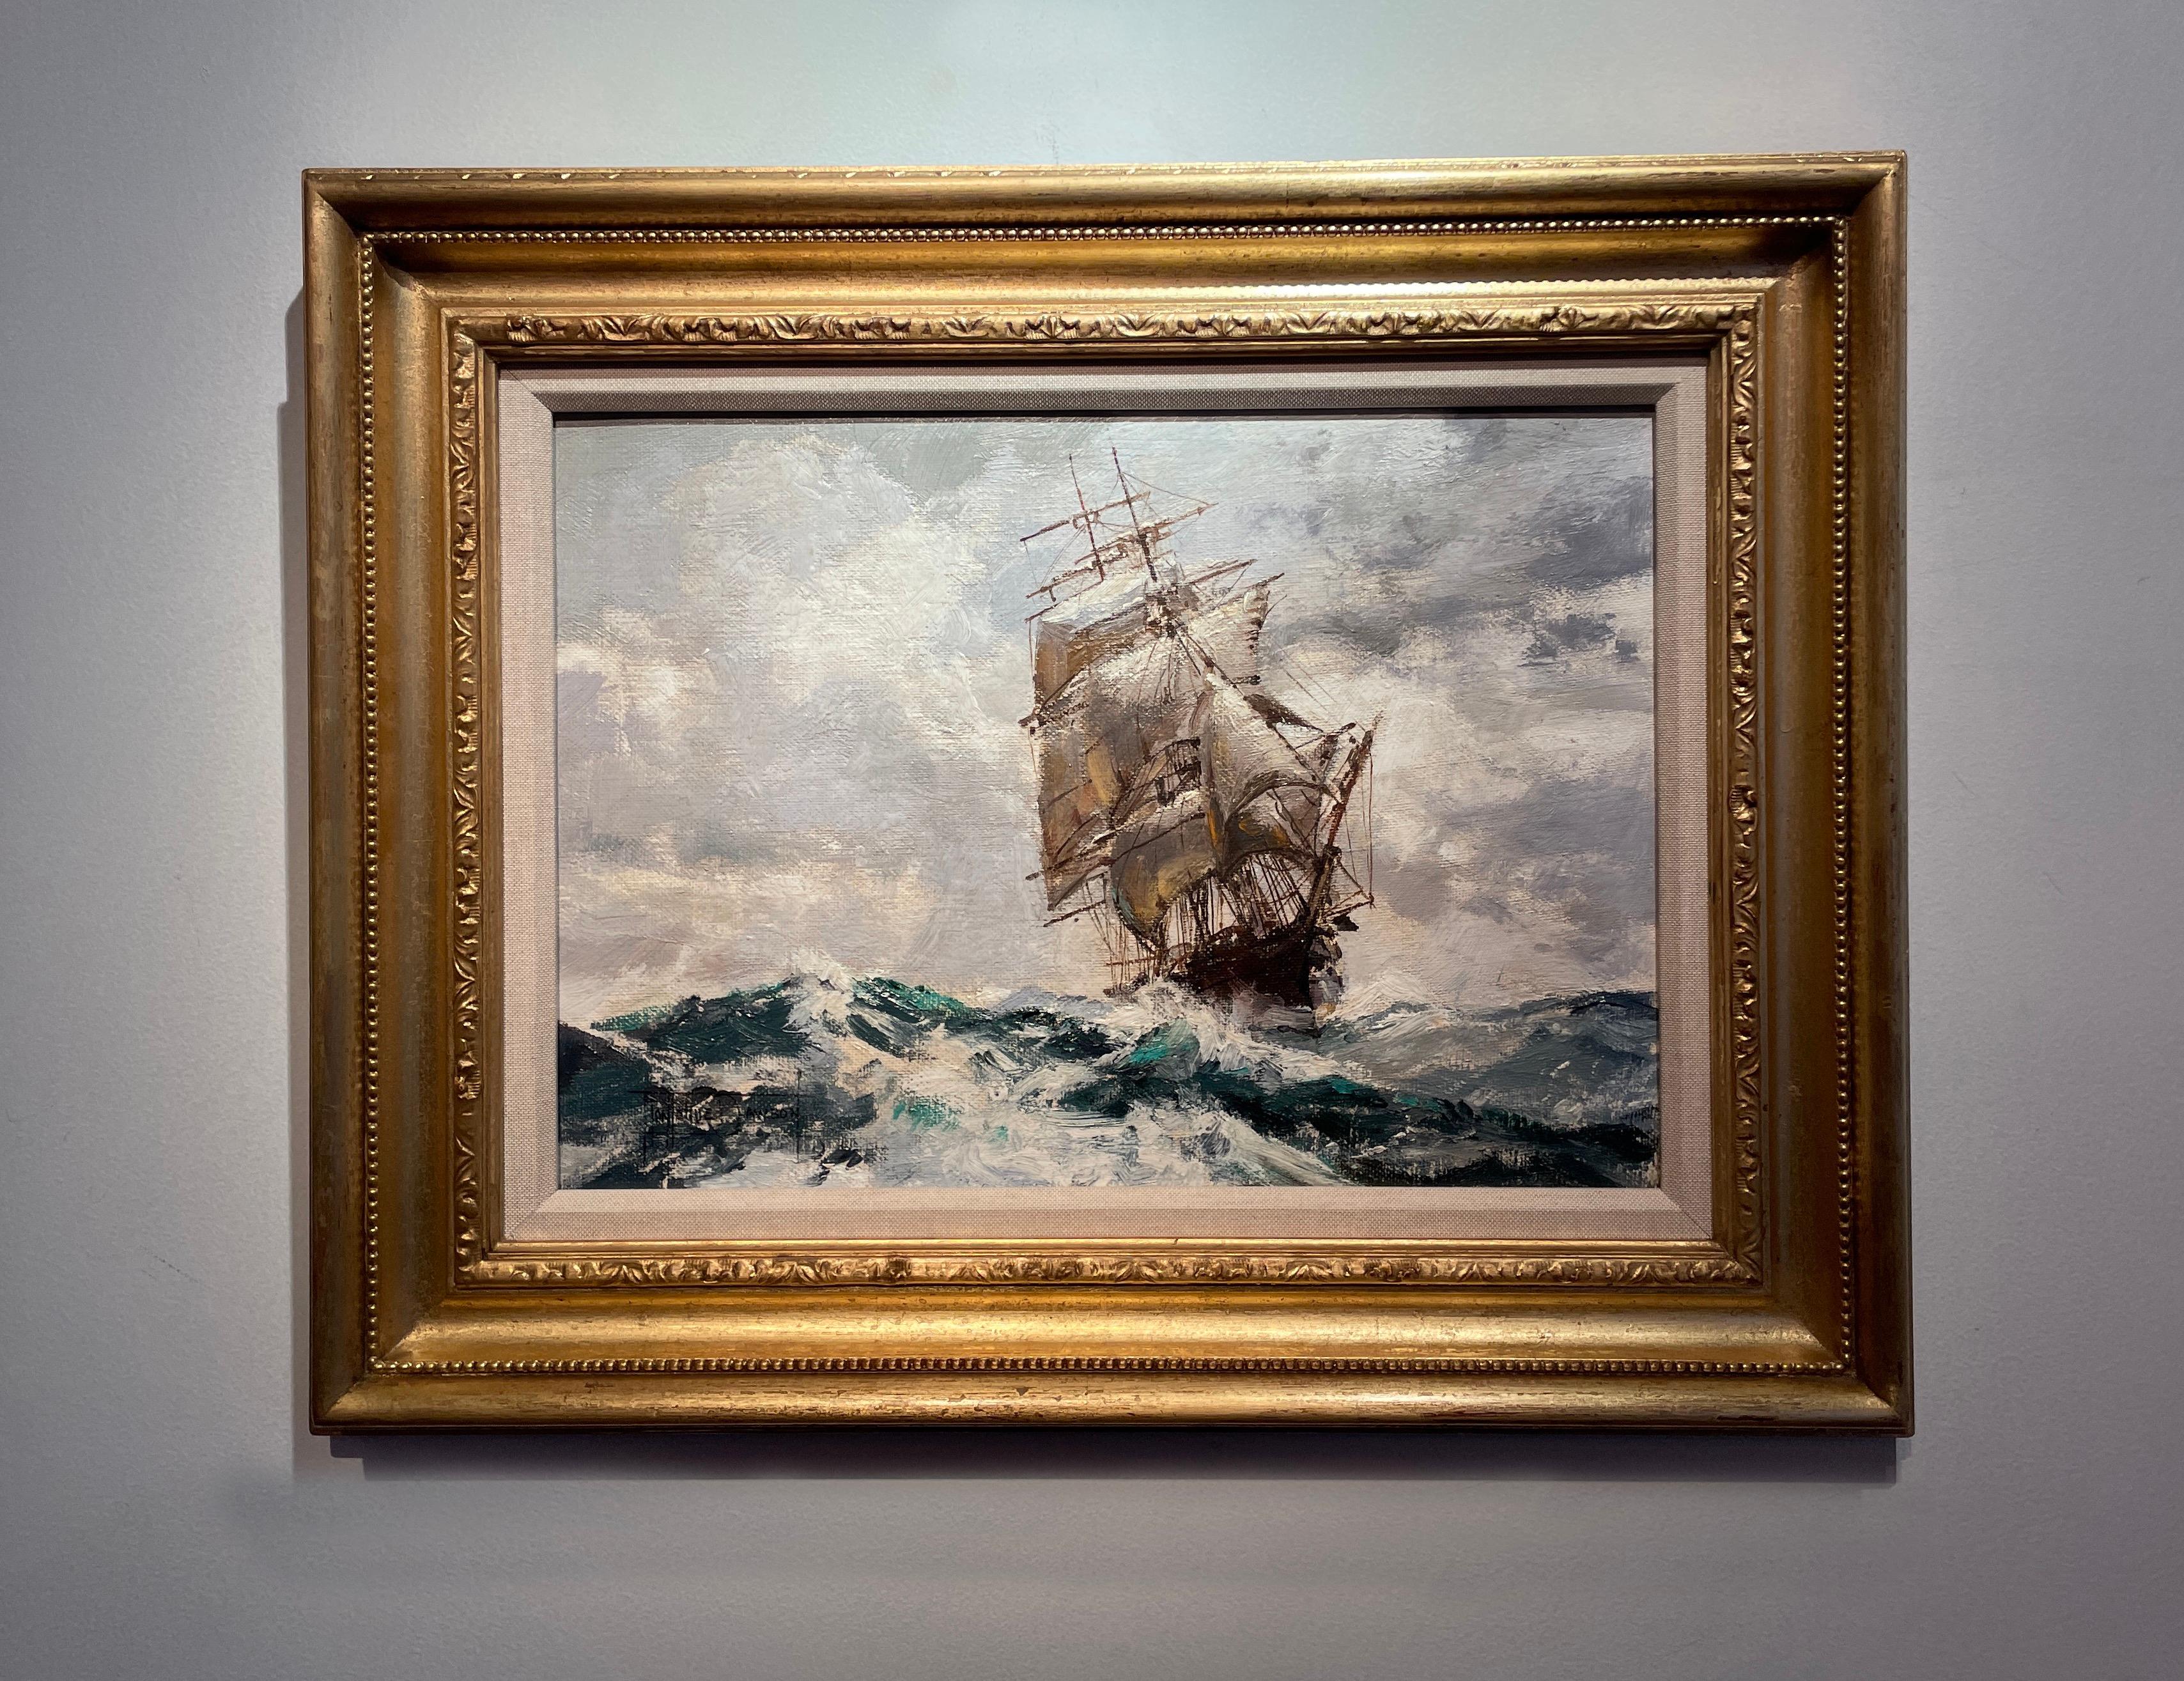 Montague Dawson Landscape Painting - 'Making a Run' 20th Century Atmospheric Seascape painting of a clipper at sea